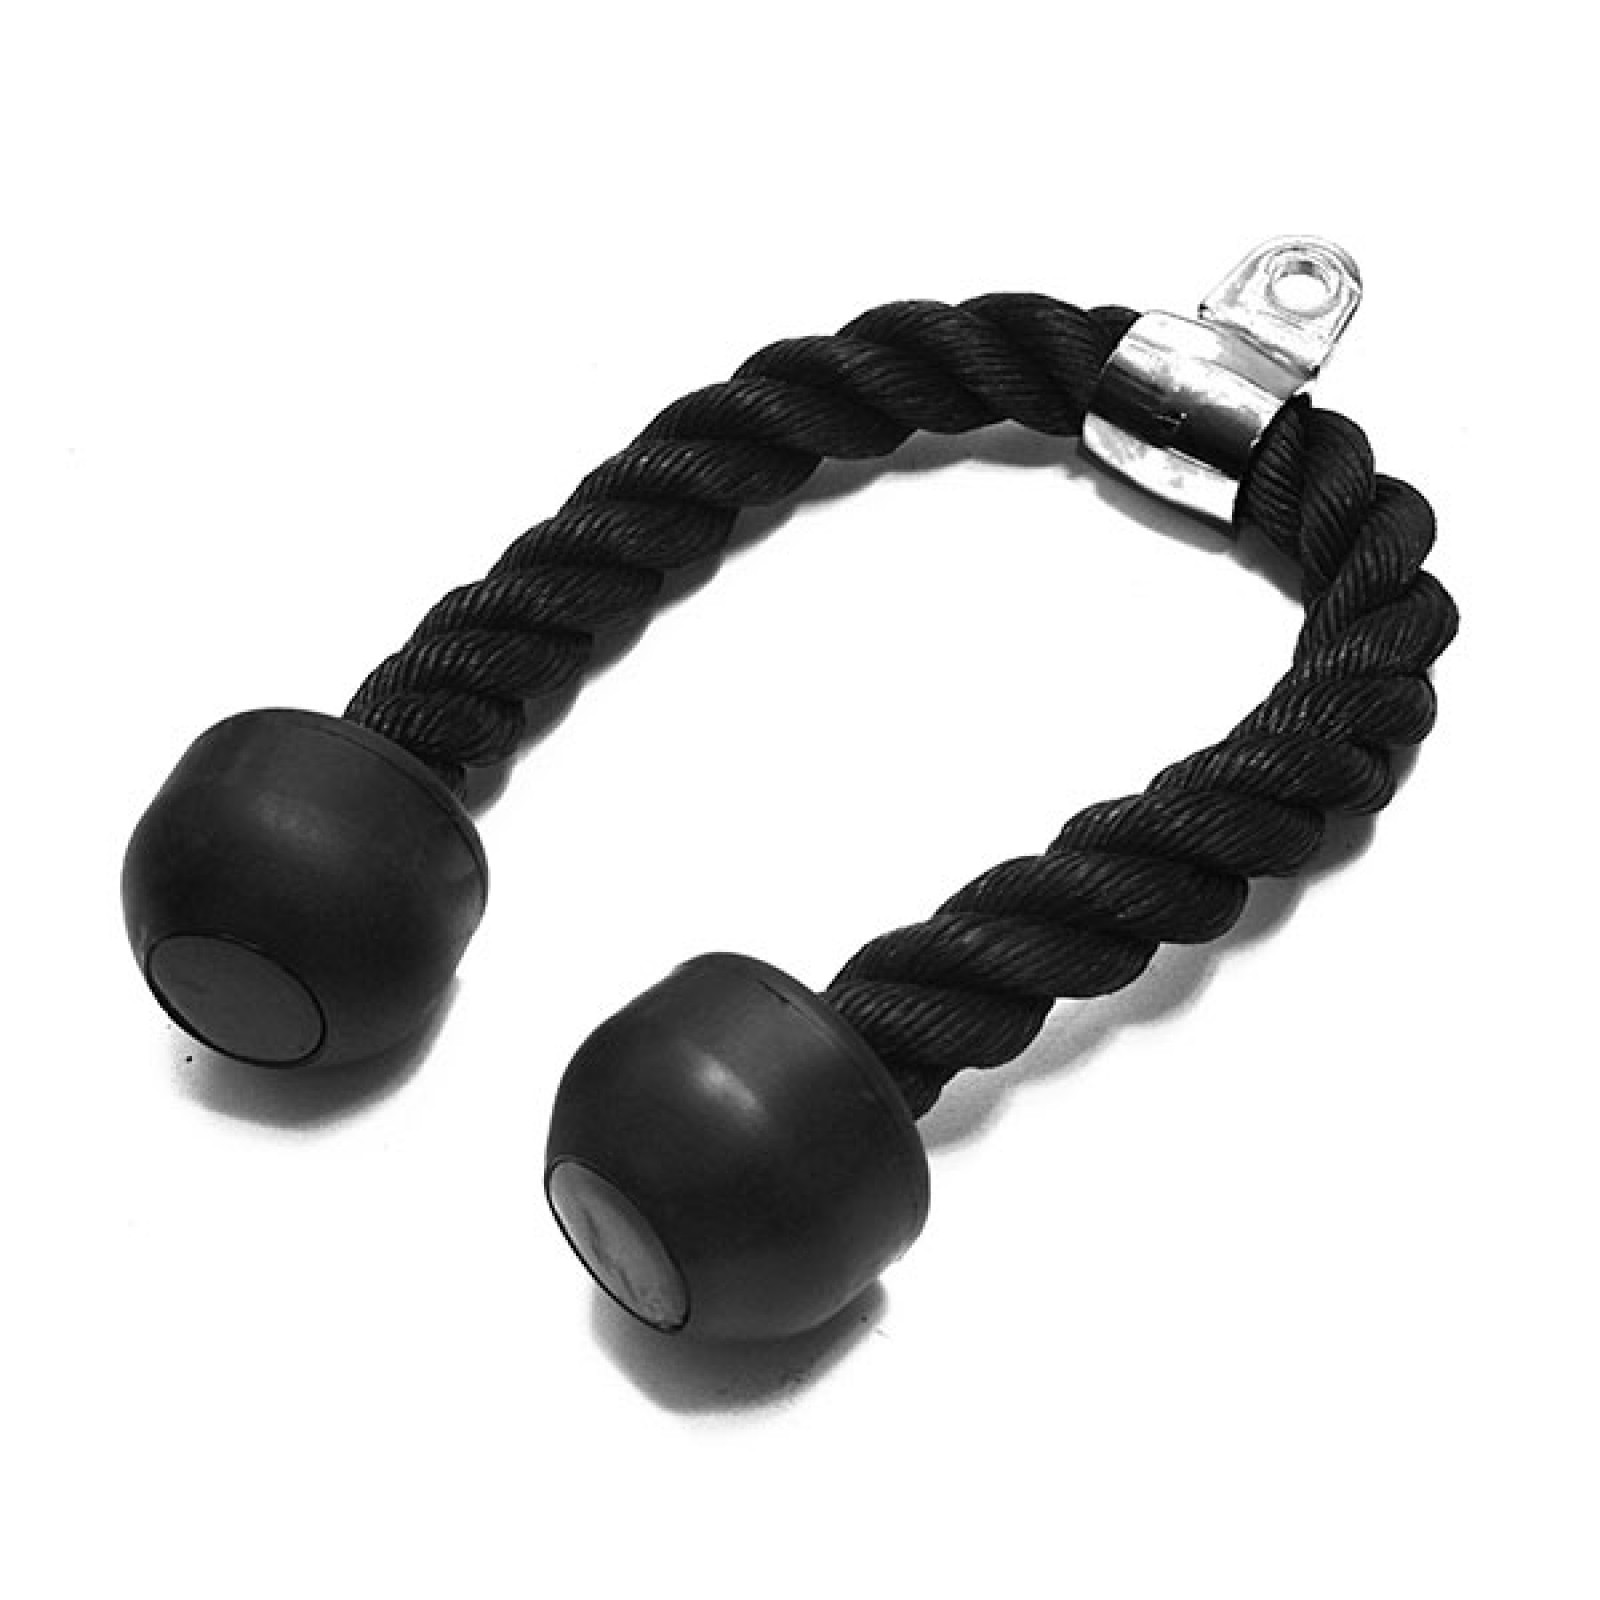 Home Gym Tricep Rope Handle Rubber Pull Down Bicep Cable Attachment Exercise UK 